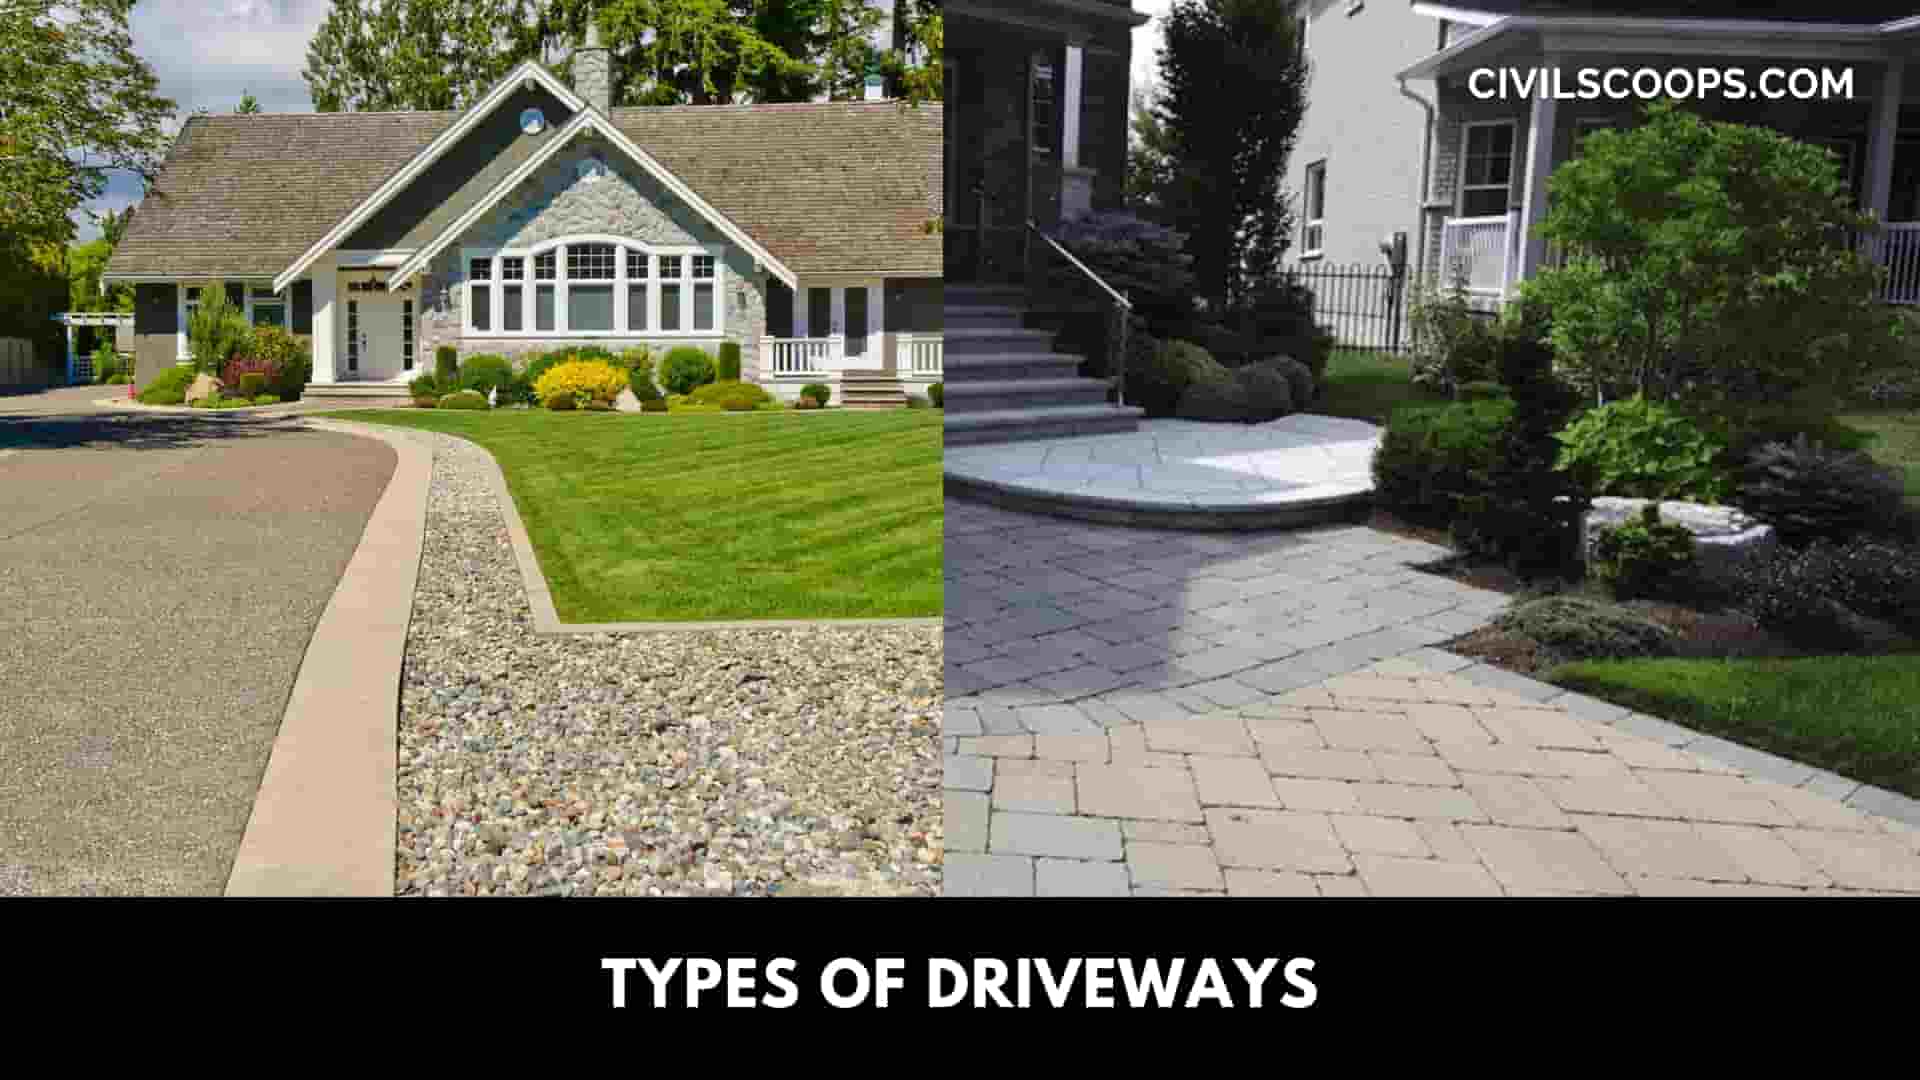 Types of Driveways